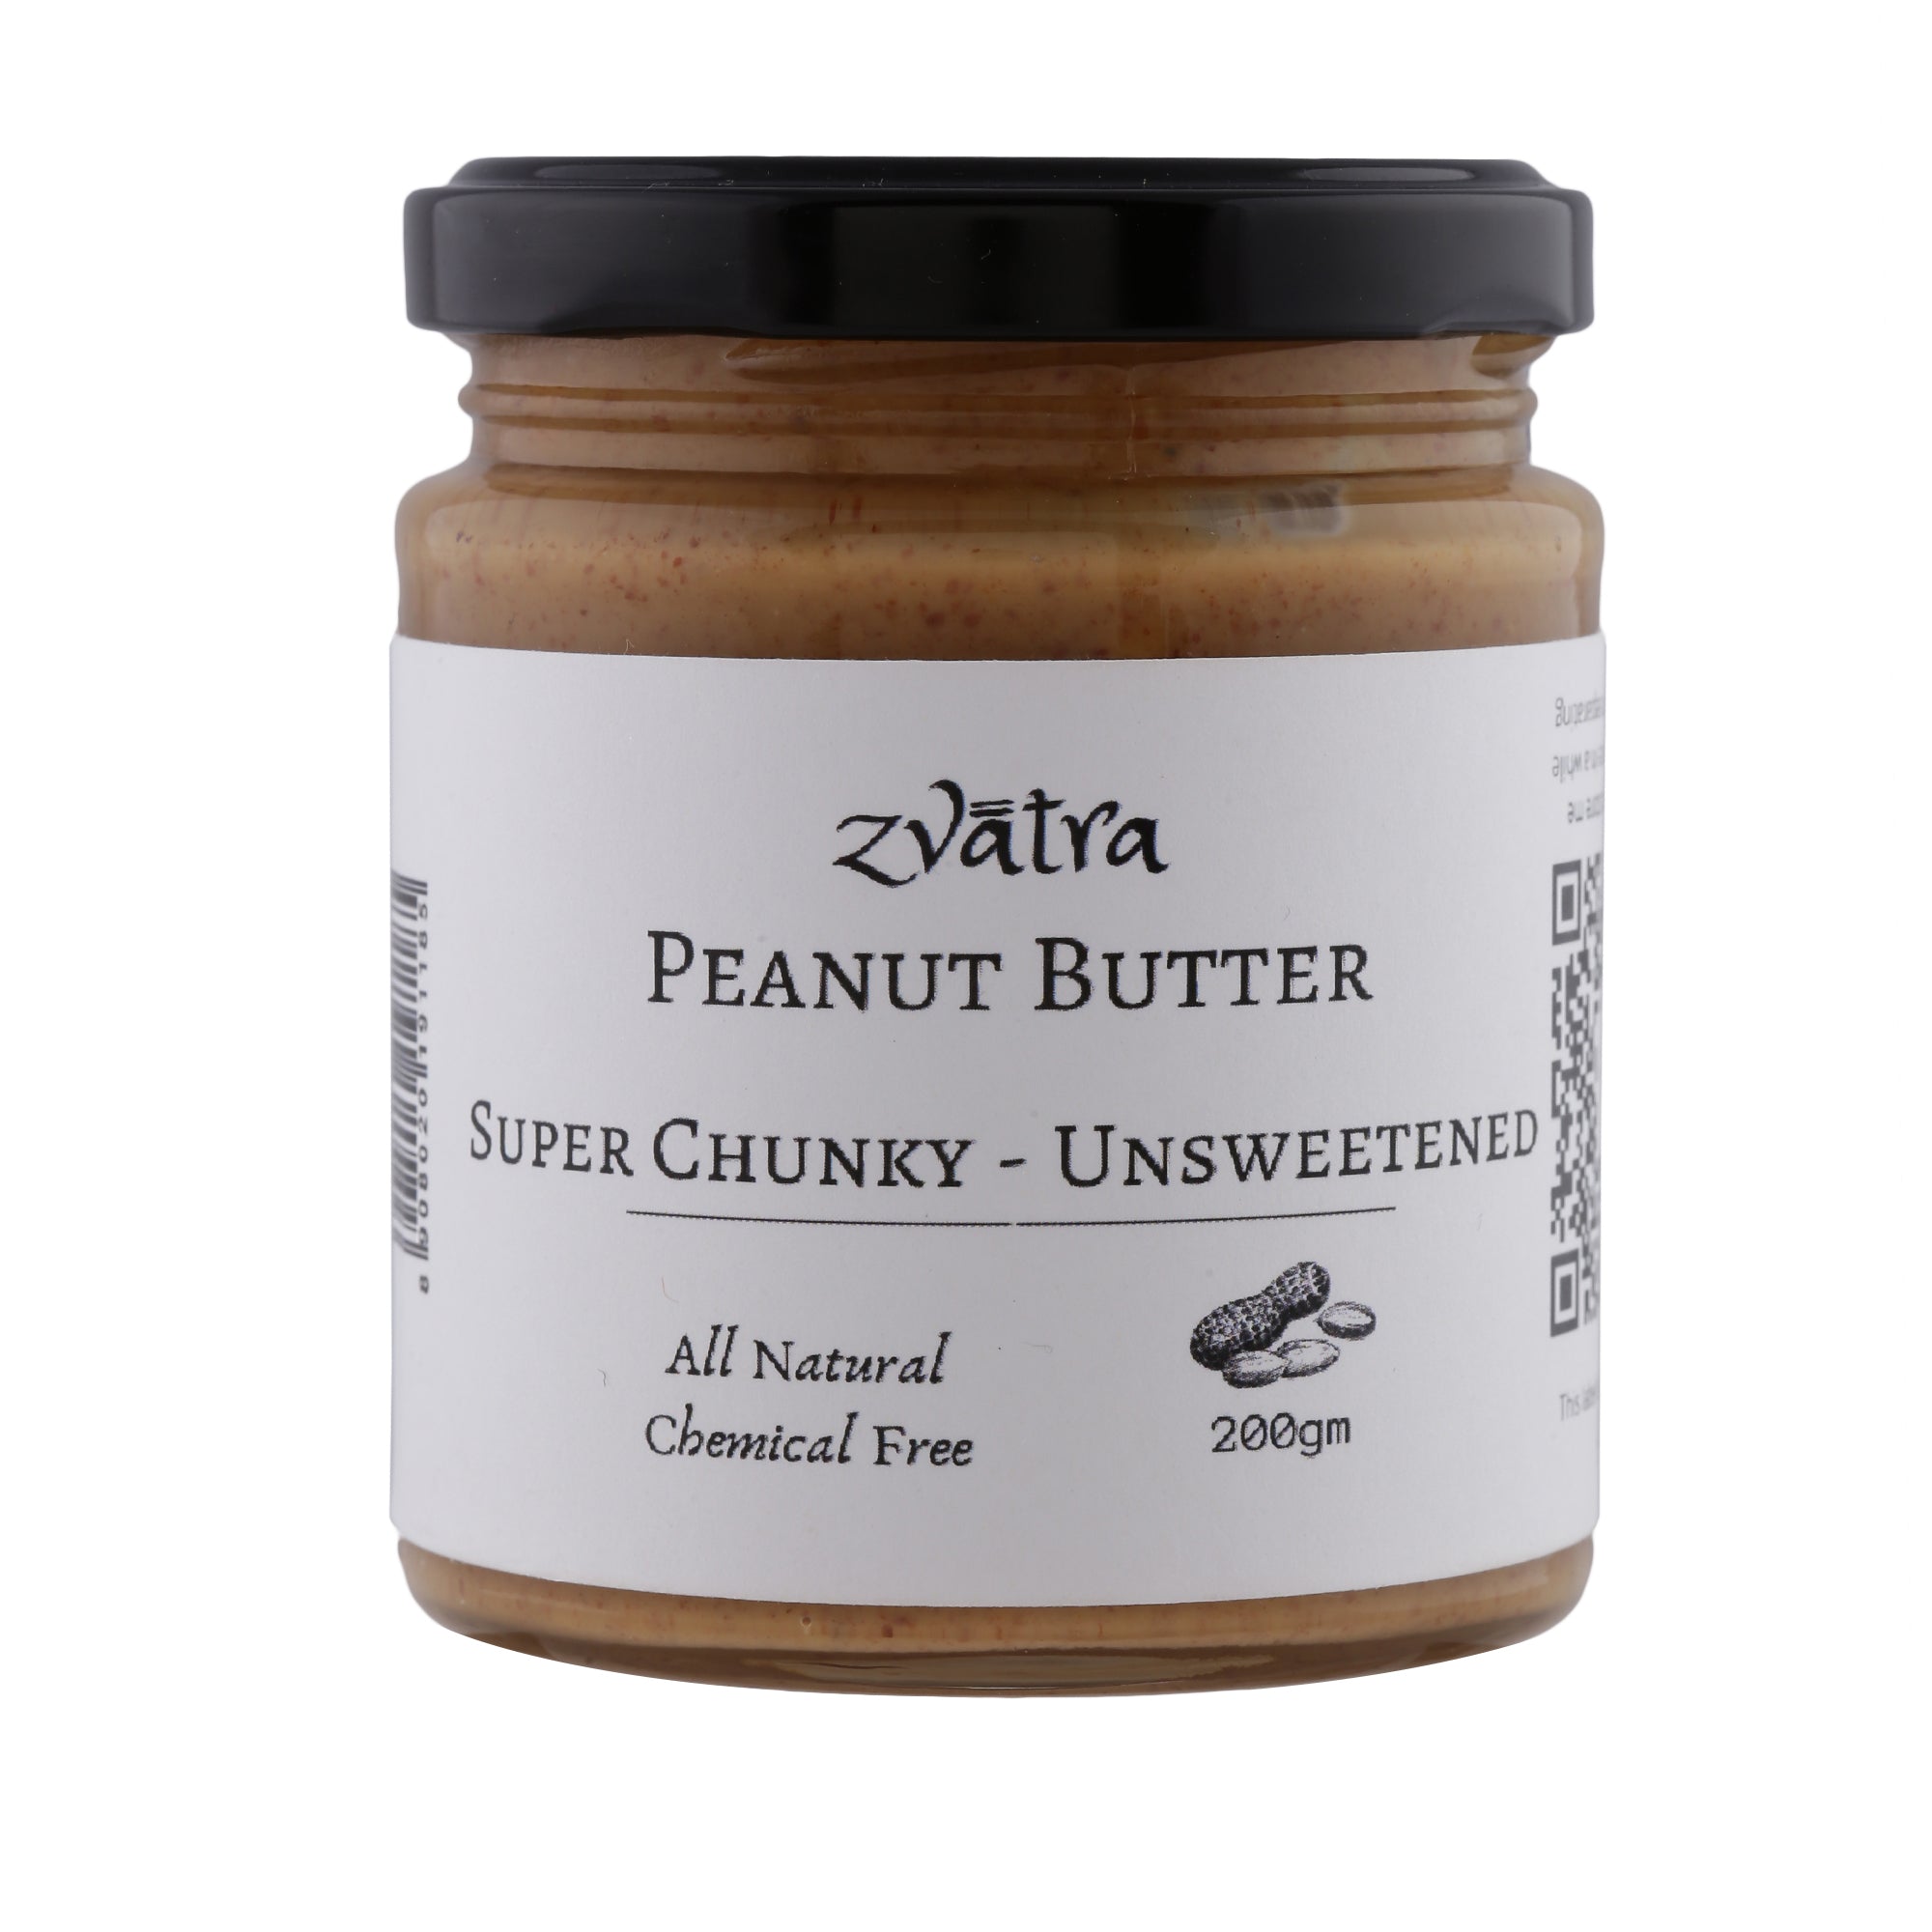 Peanut Butter - Unsweetened - Super Chunky